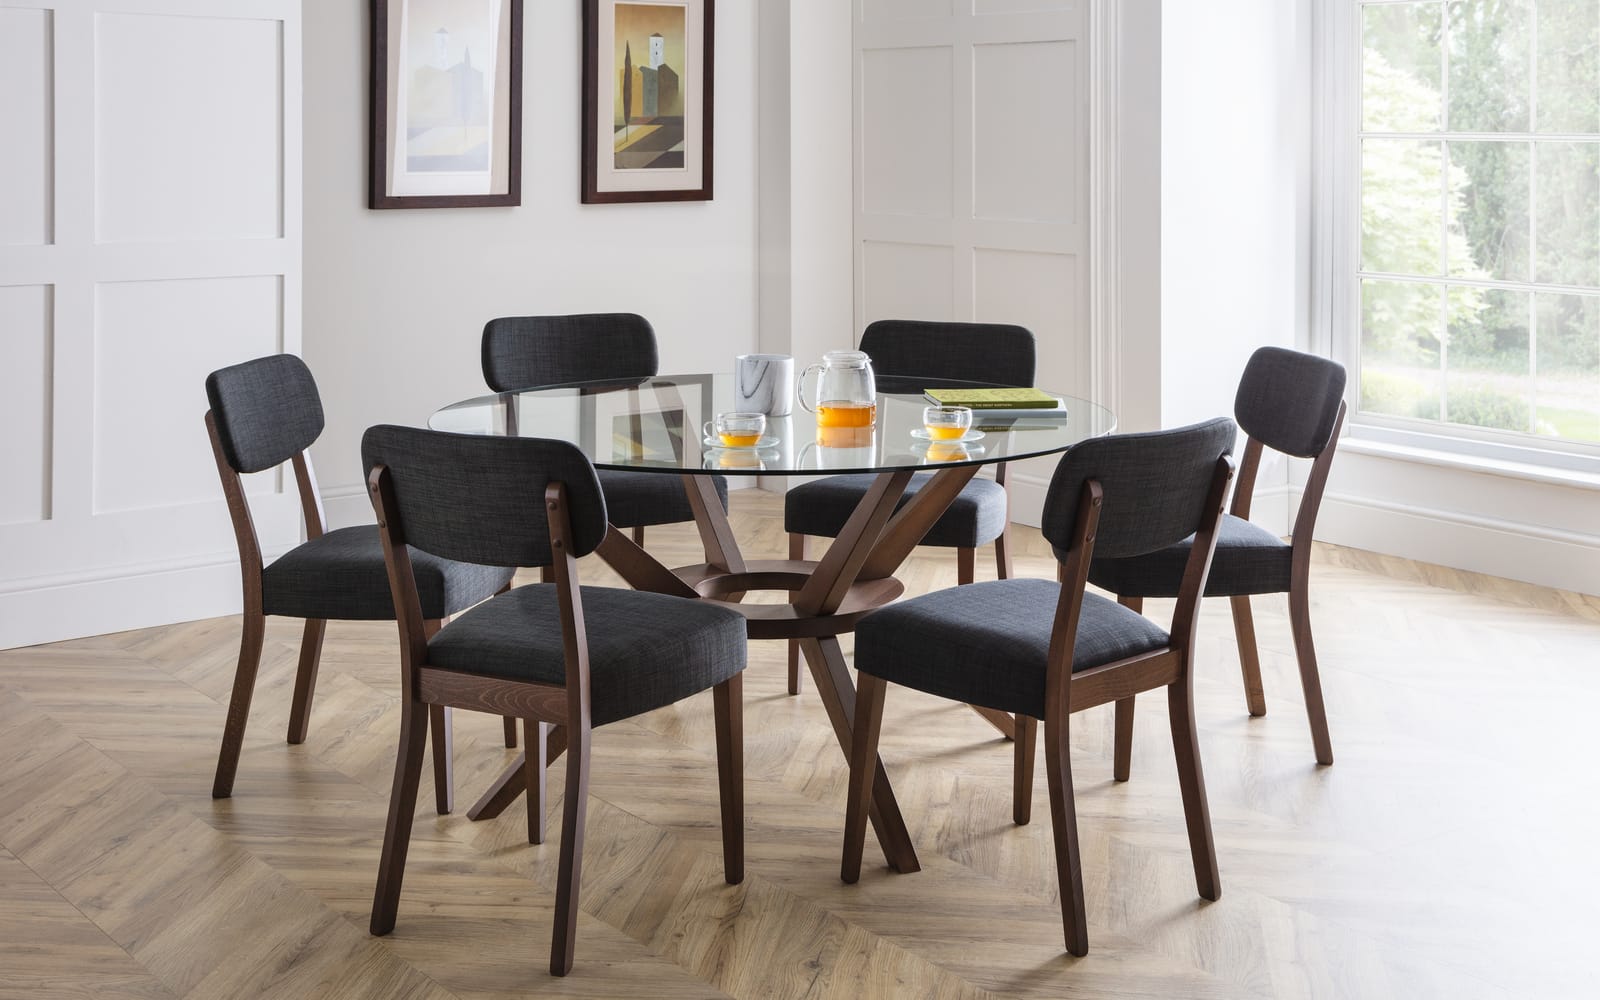 Chelsea Dining Table Round Glass, Round Dining Table And Chairs For 6 Ireland